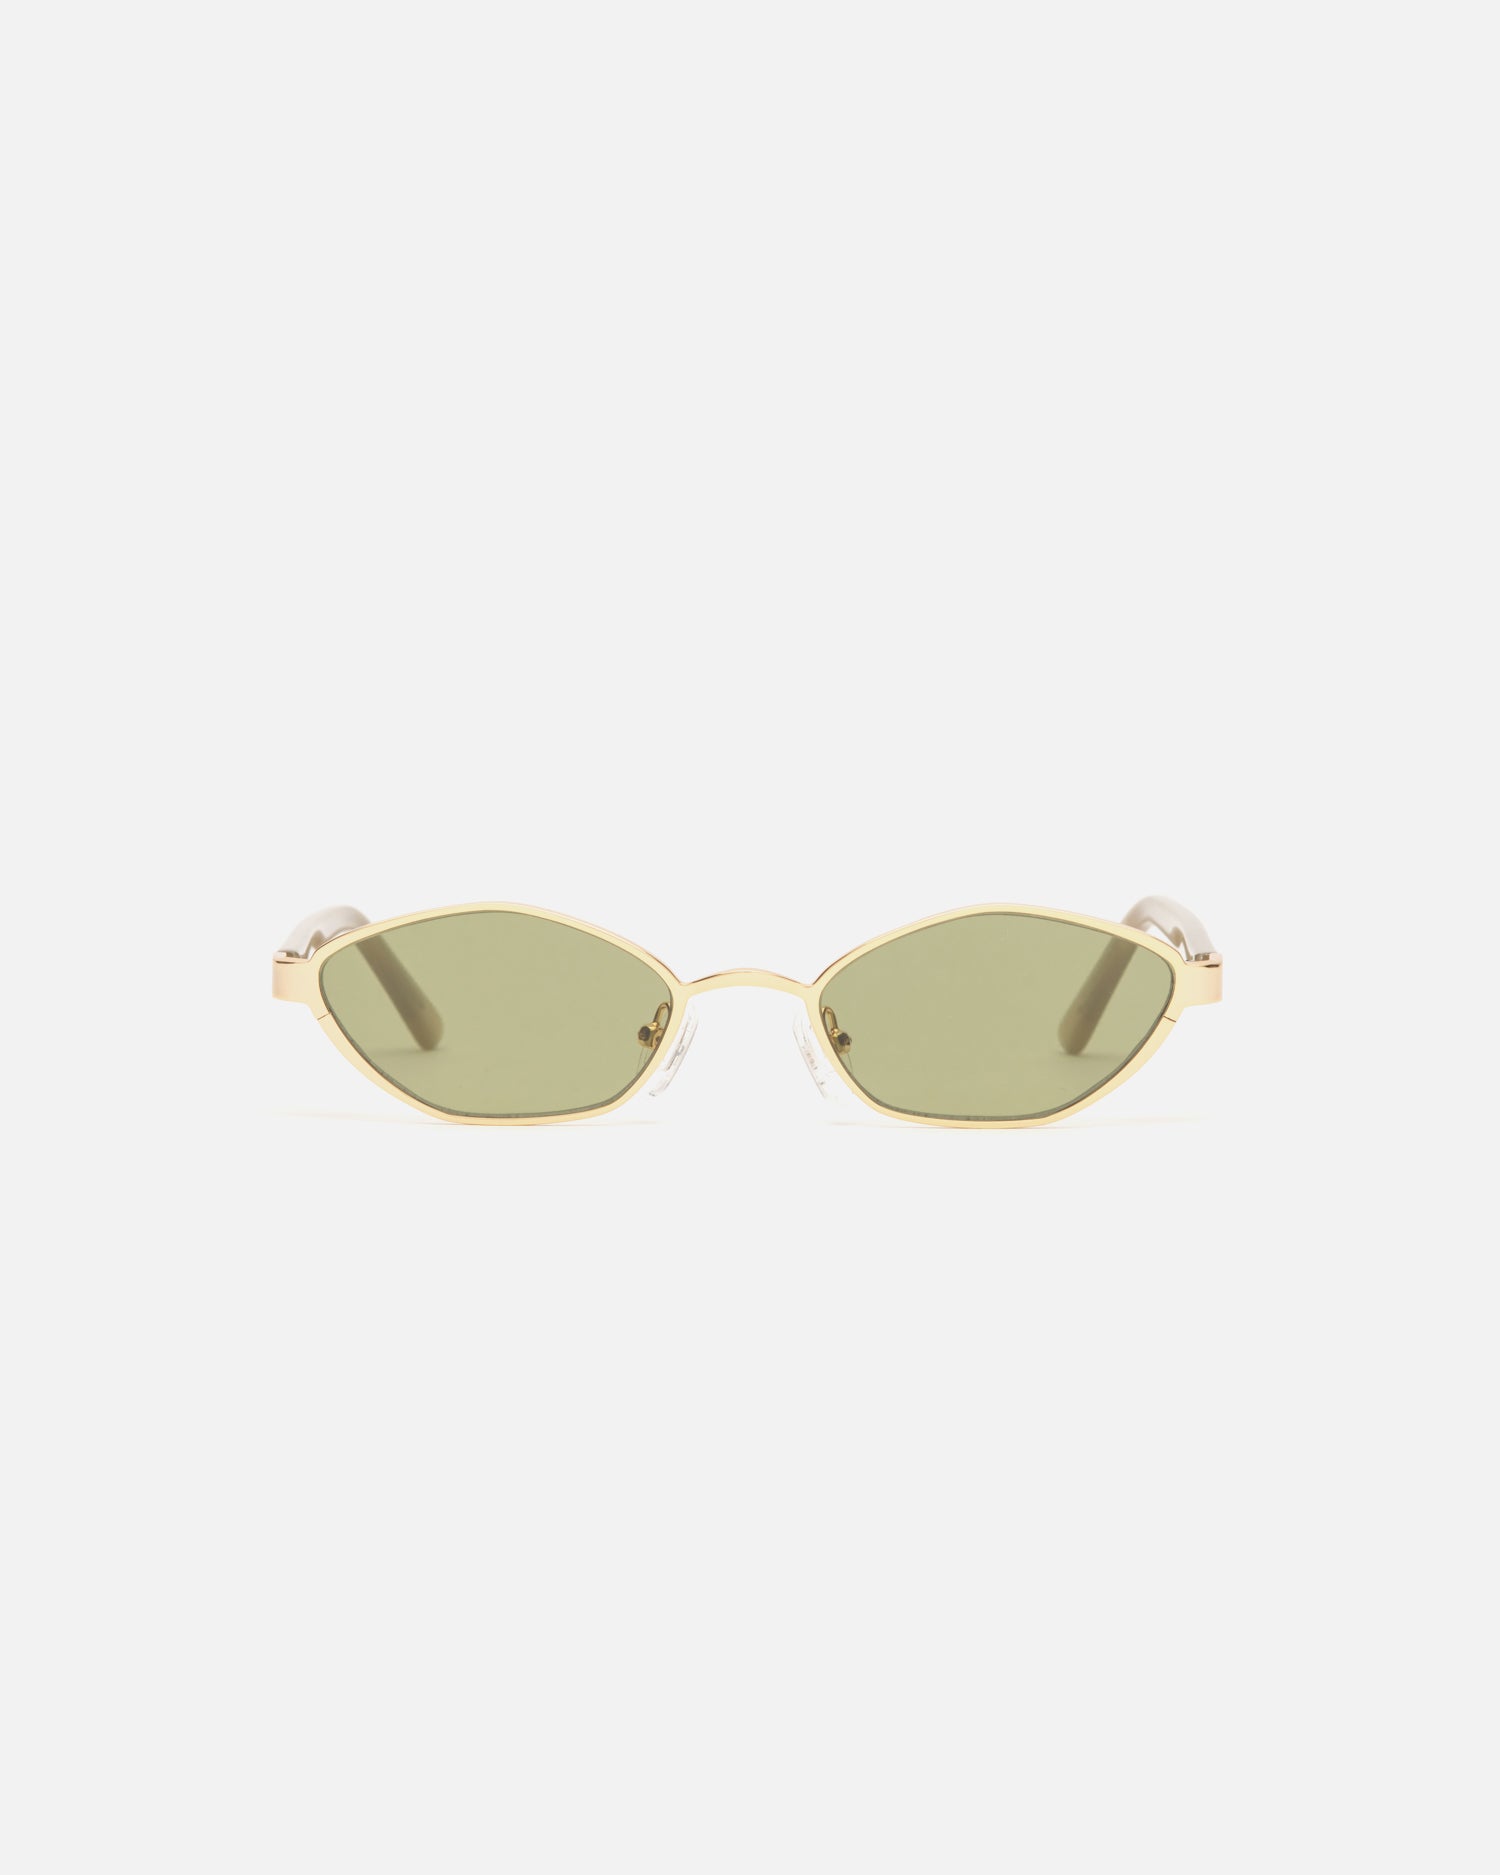 Lu Goldie Farrah Gold Wire Frame Round Sunglasses in Leaf green, front image